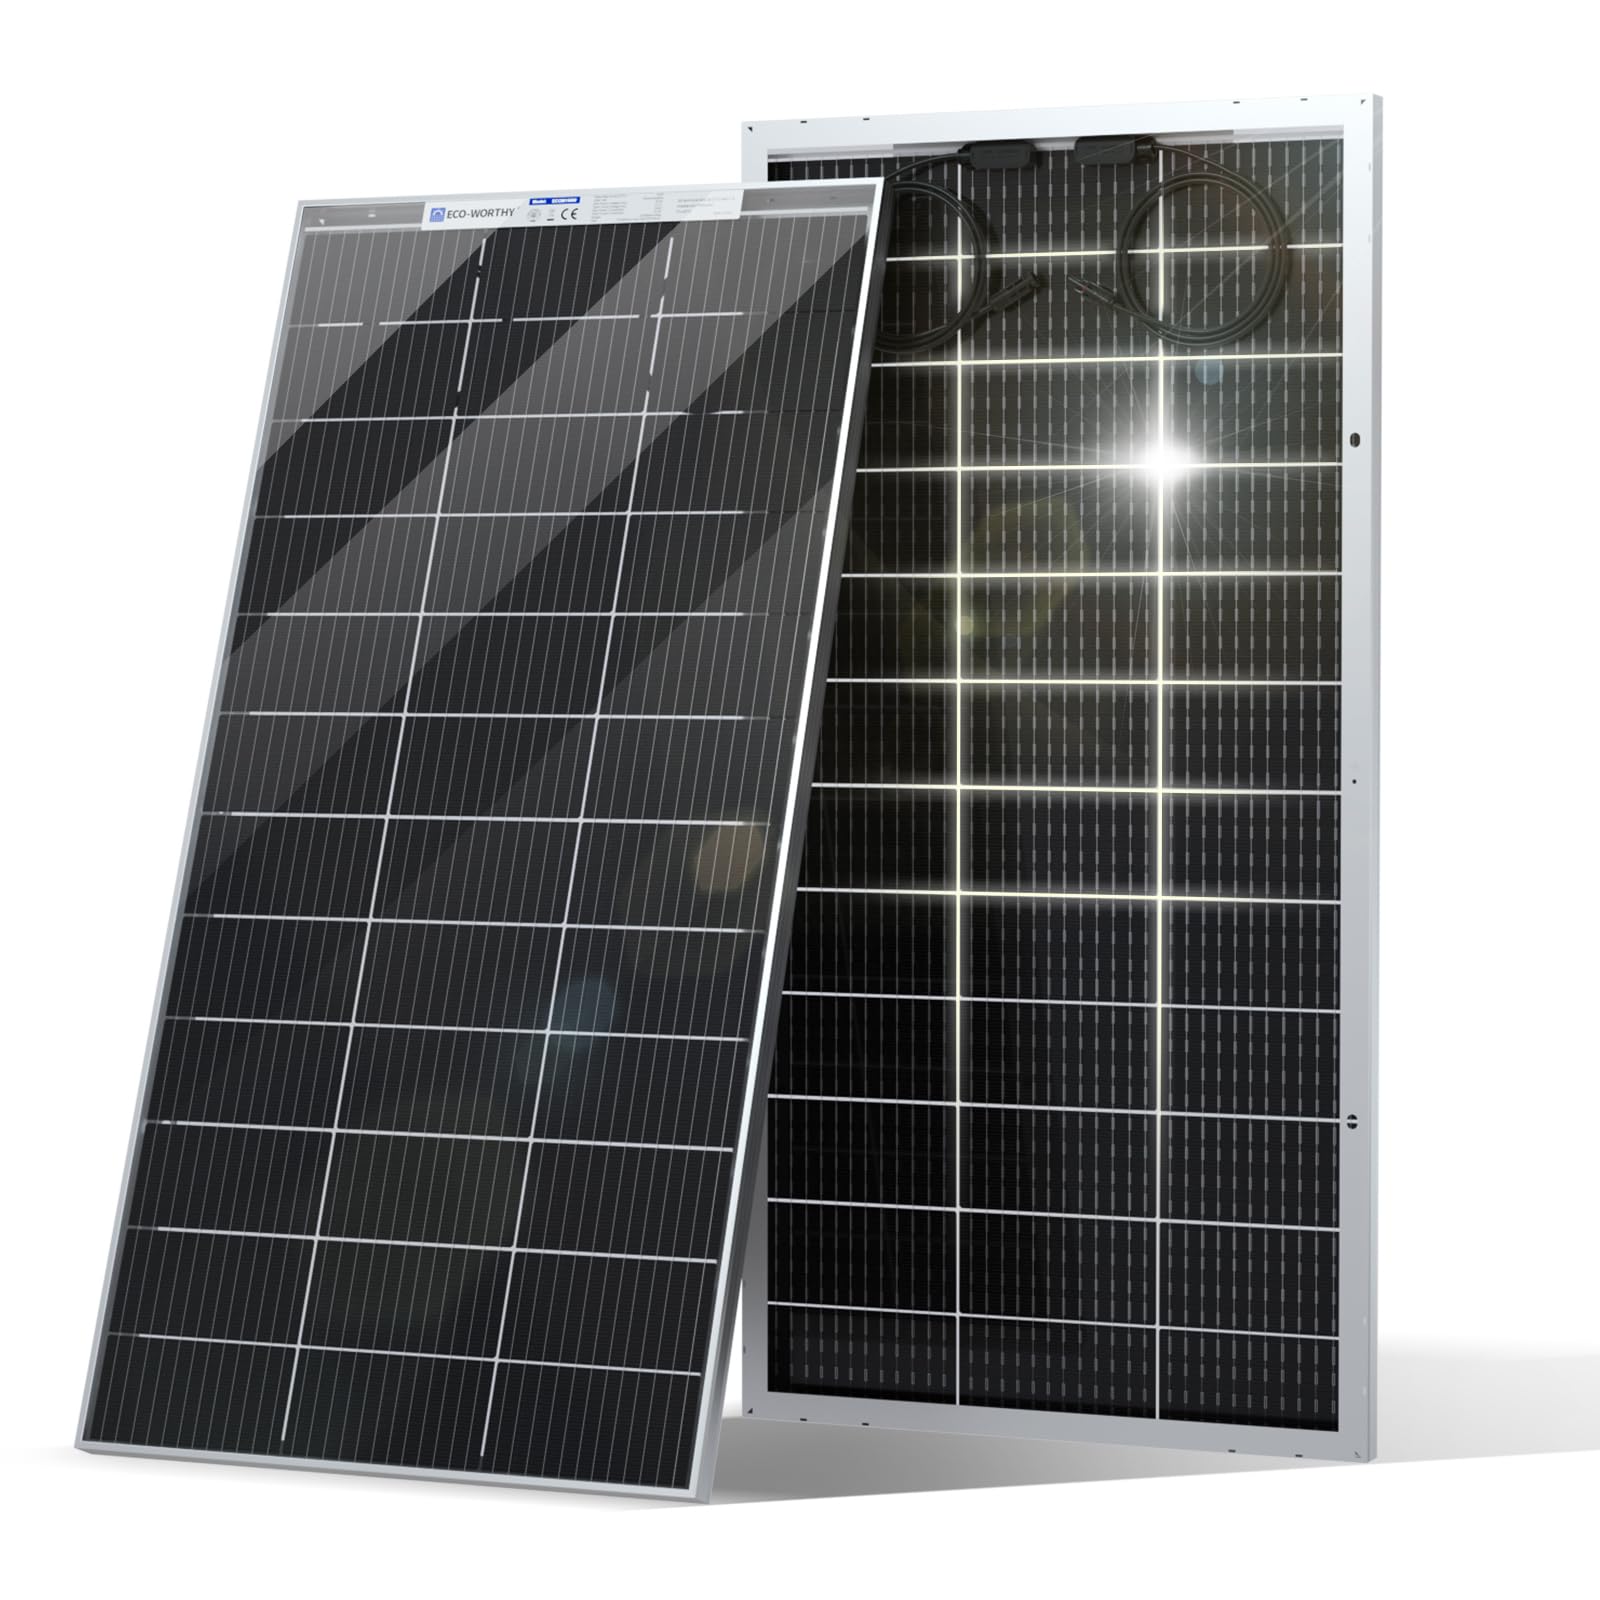 ECO-WORTHY Bifacial 195 Watt 12 Volt 12BB Solar Panel Monocrystalline Double-Sided Power Generation Rigid High-Efficiency PV Module Power Charger for RV,Sunsheds,Canopies,Farms,Home and Off-Grid